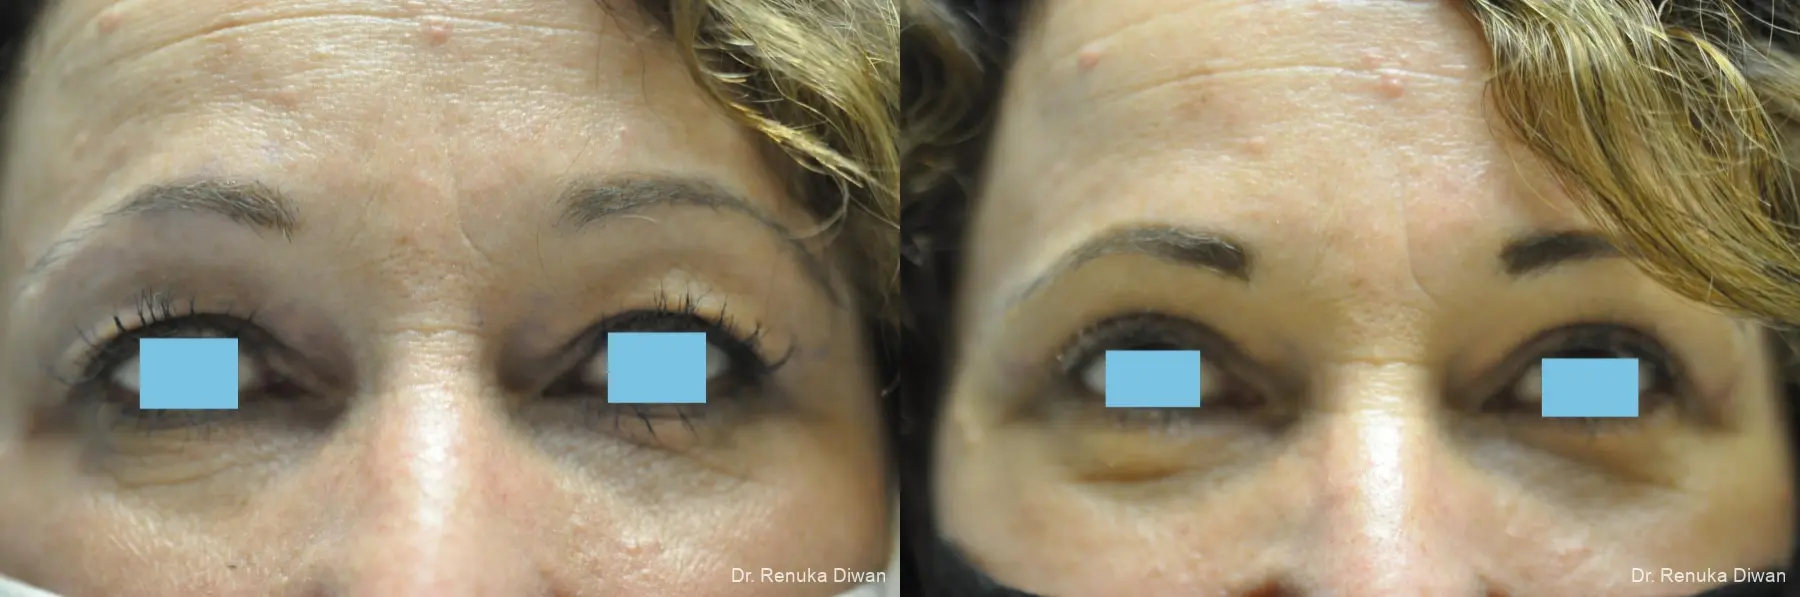 Blepharoplasty: Patient 14 - Before and After 2